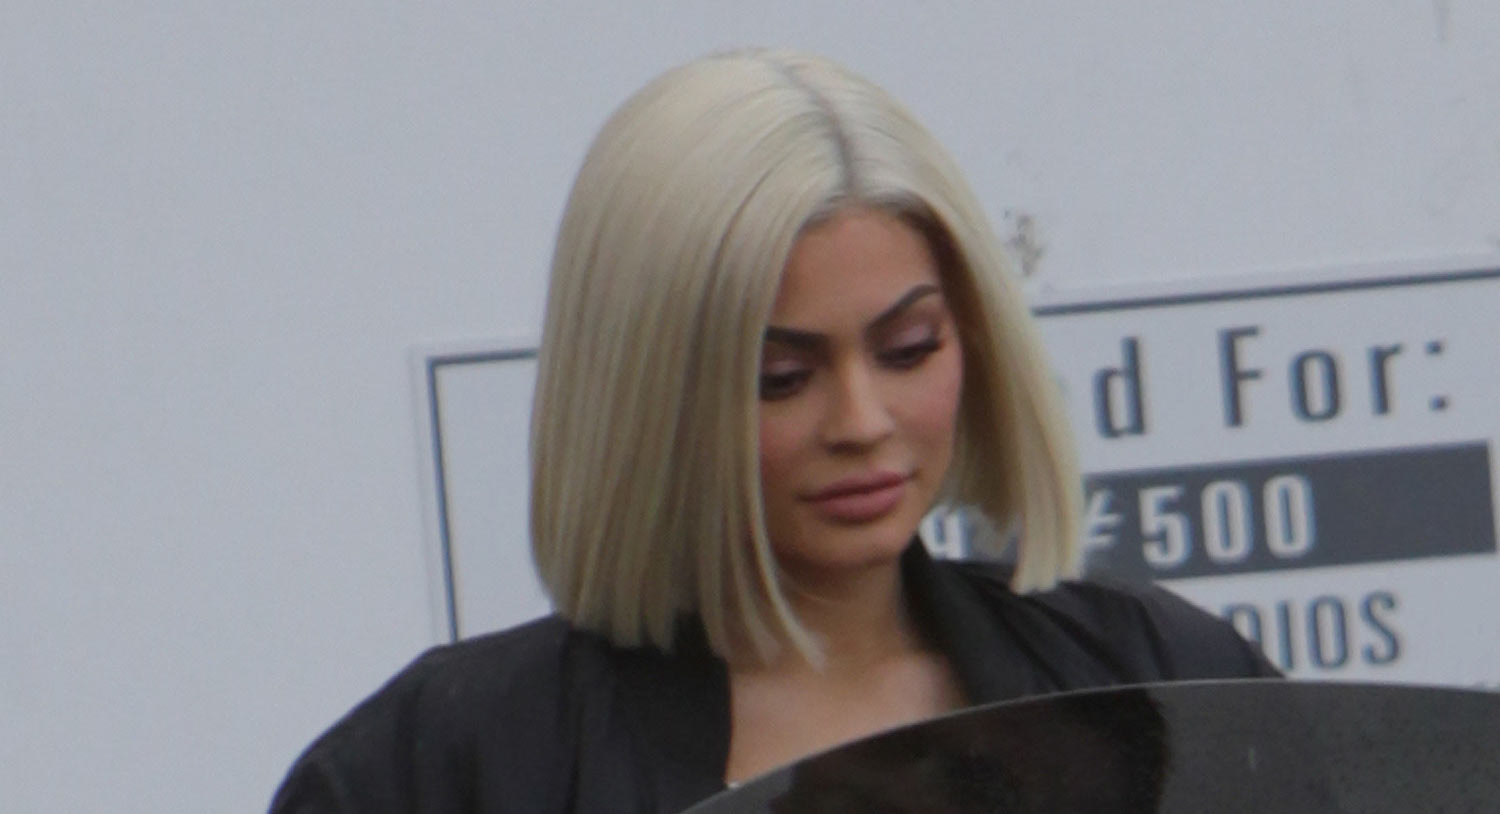 Kylie Jenner returns to platinum blonde bob as she flashes her bum